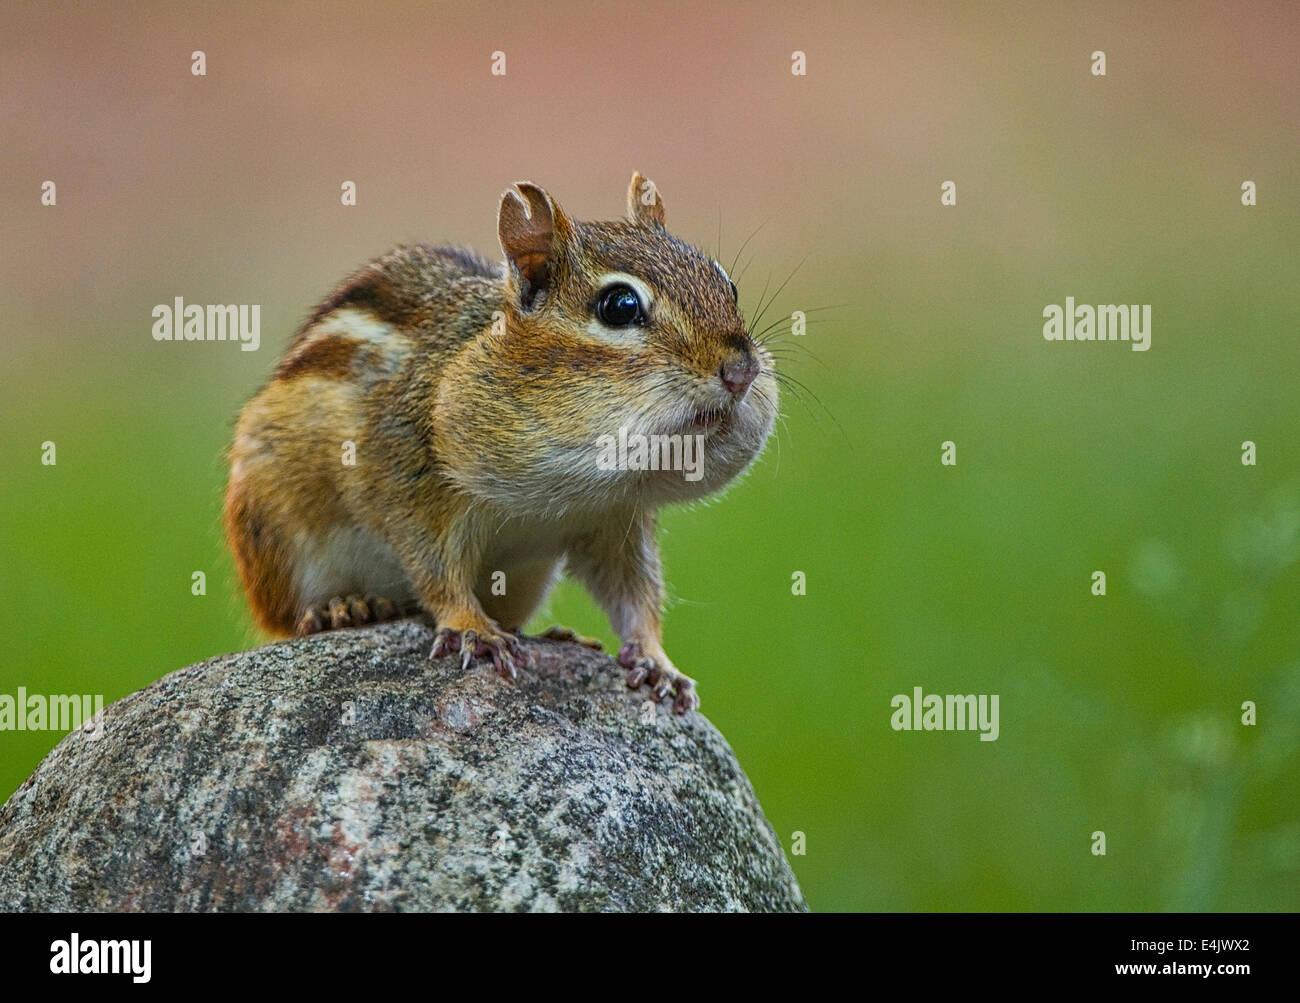 A cute, puffy-cheeked Eastern Chipmunk (Tamias striatus) perches alerted on top of a garden rock. Stock Photo